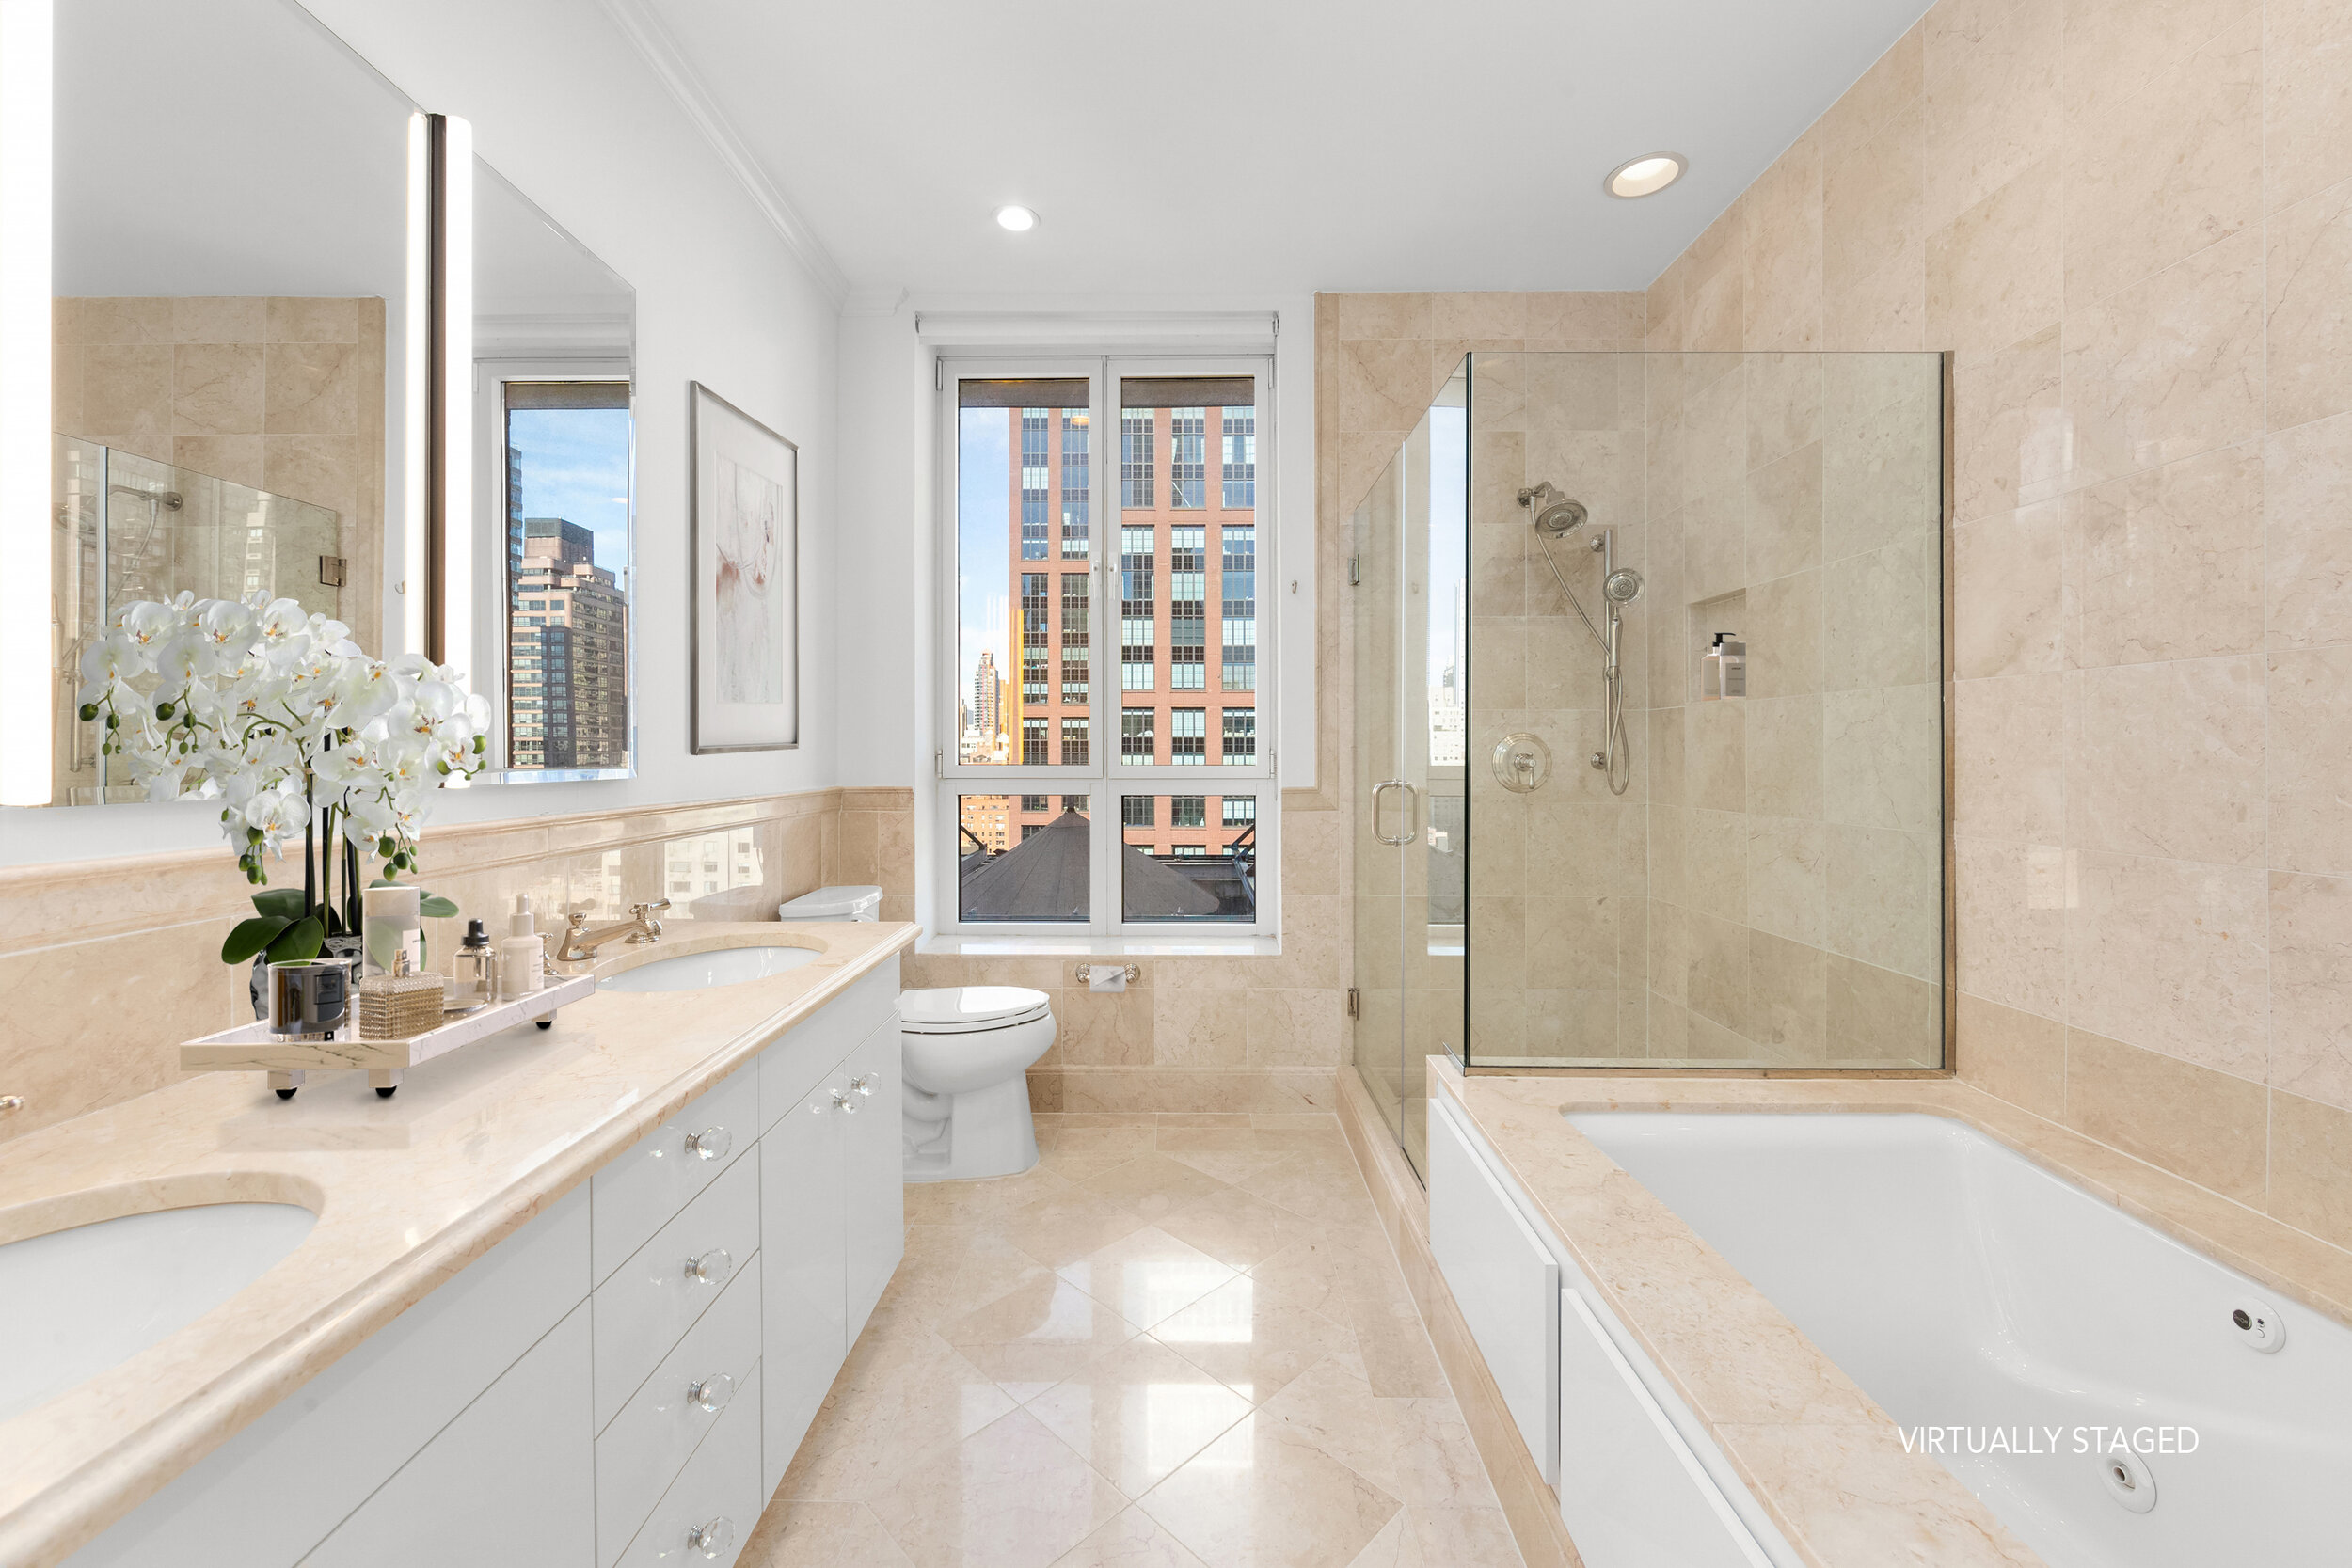  Douglas Elliman Real Estate, has announced that top agent Elana Schoppmann will oversee the exclusive sales, leasing and marketing for The Penthouse Collection at The Beekman Regent, located in Manhattan’s Midtown East neighborhood. The collection i